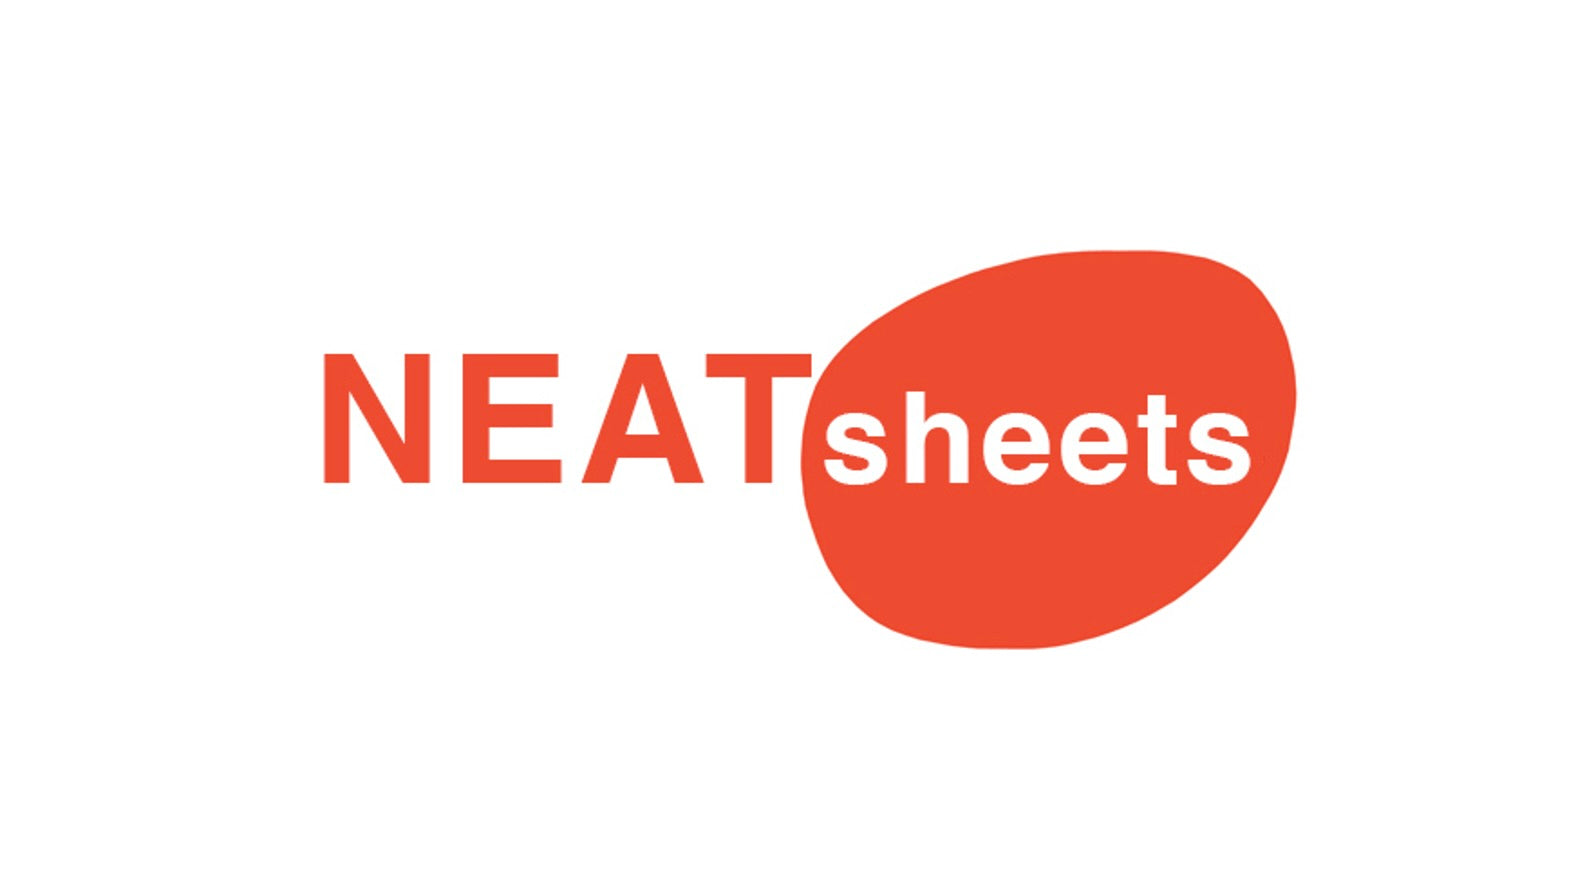 Load video: Overview of NEATsheets disposable adhesive napkins which are ideal for dining, meal prep, caregiving, travel, commuting, arts &amp; crafts, or anytime you want to Keep It NEAT.